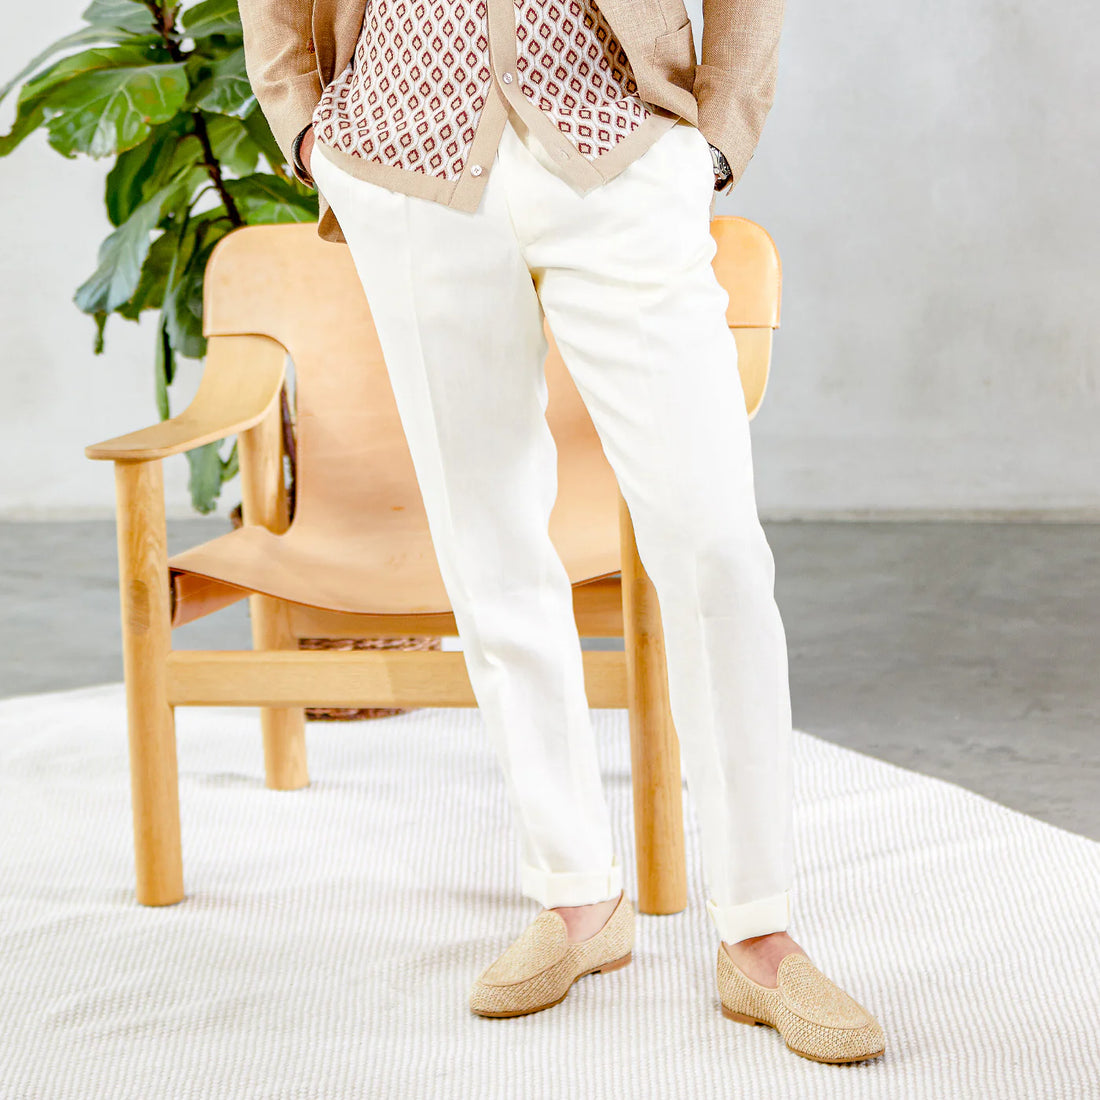 A person stands in white pants and patterned top, with beige loafers, next to a wooden chair in a bright room with a plant.